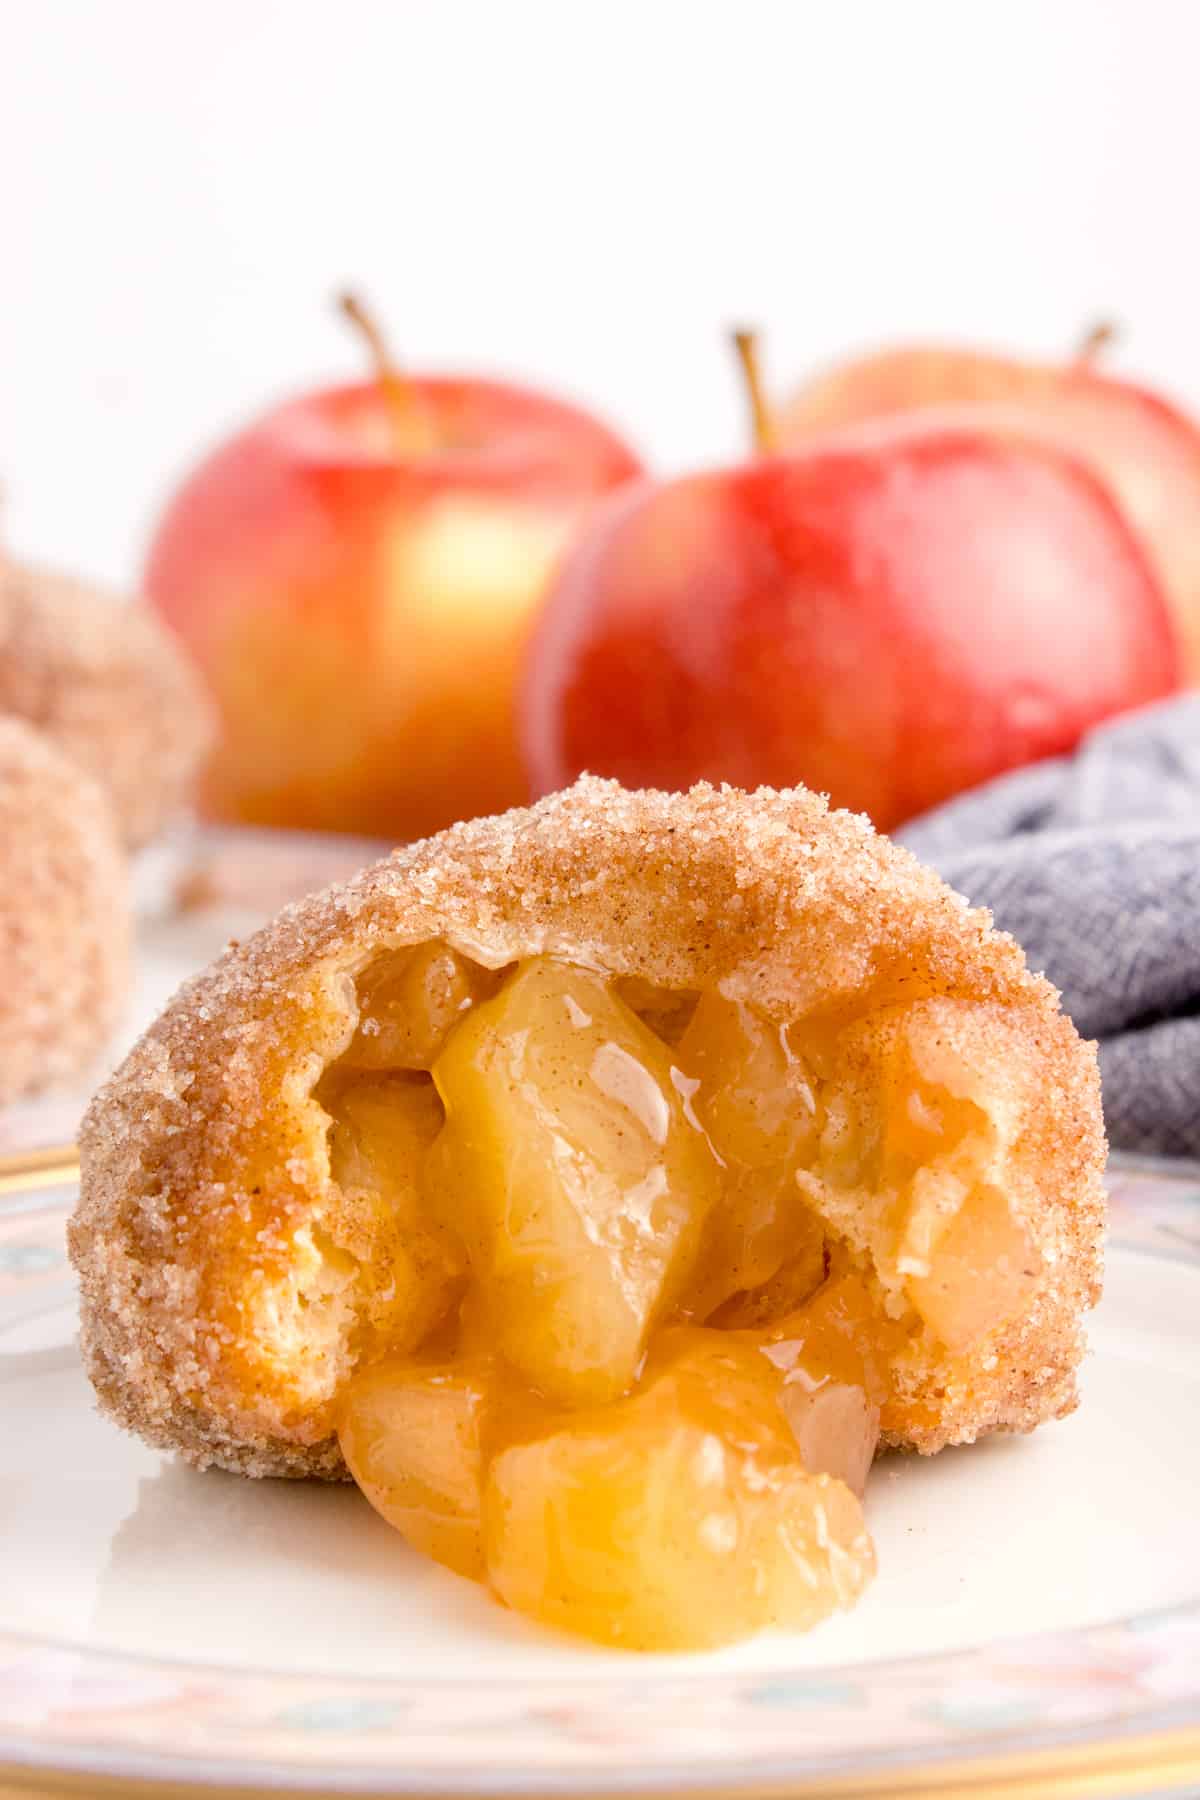  The image depicts an air fryer apple pie bomb that has been partially bitten into, revealing its luscious apple filling inside.